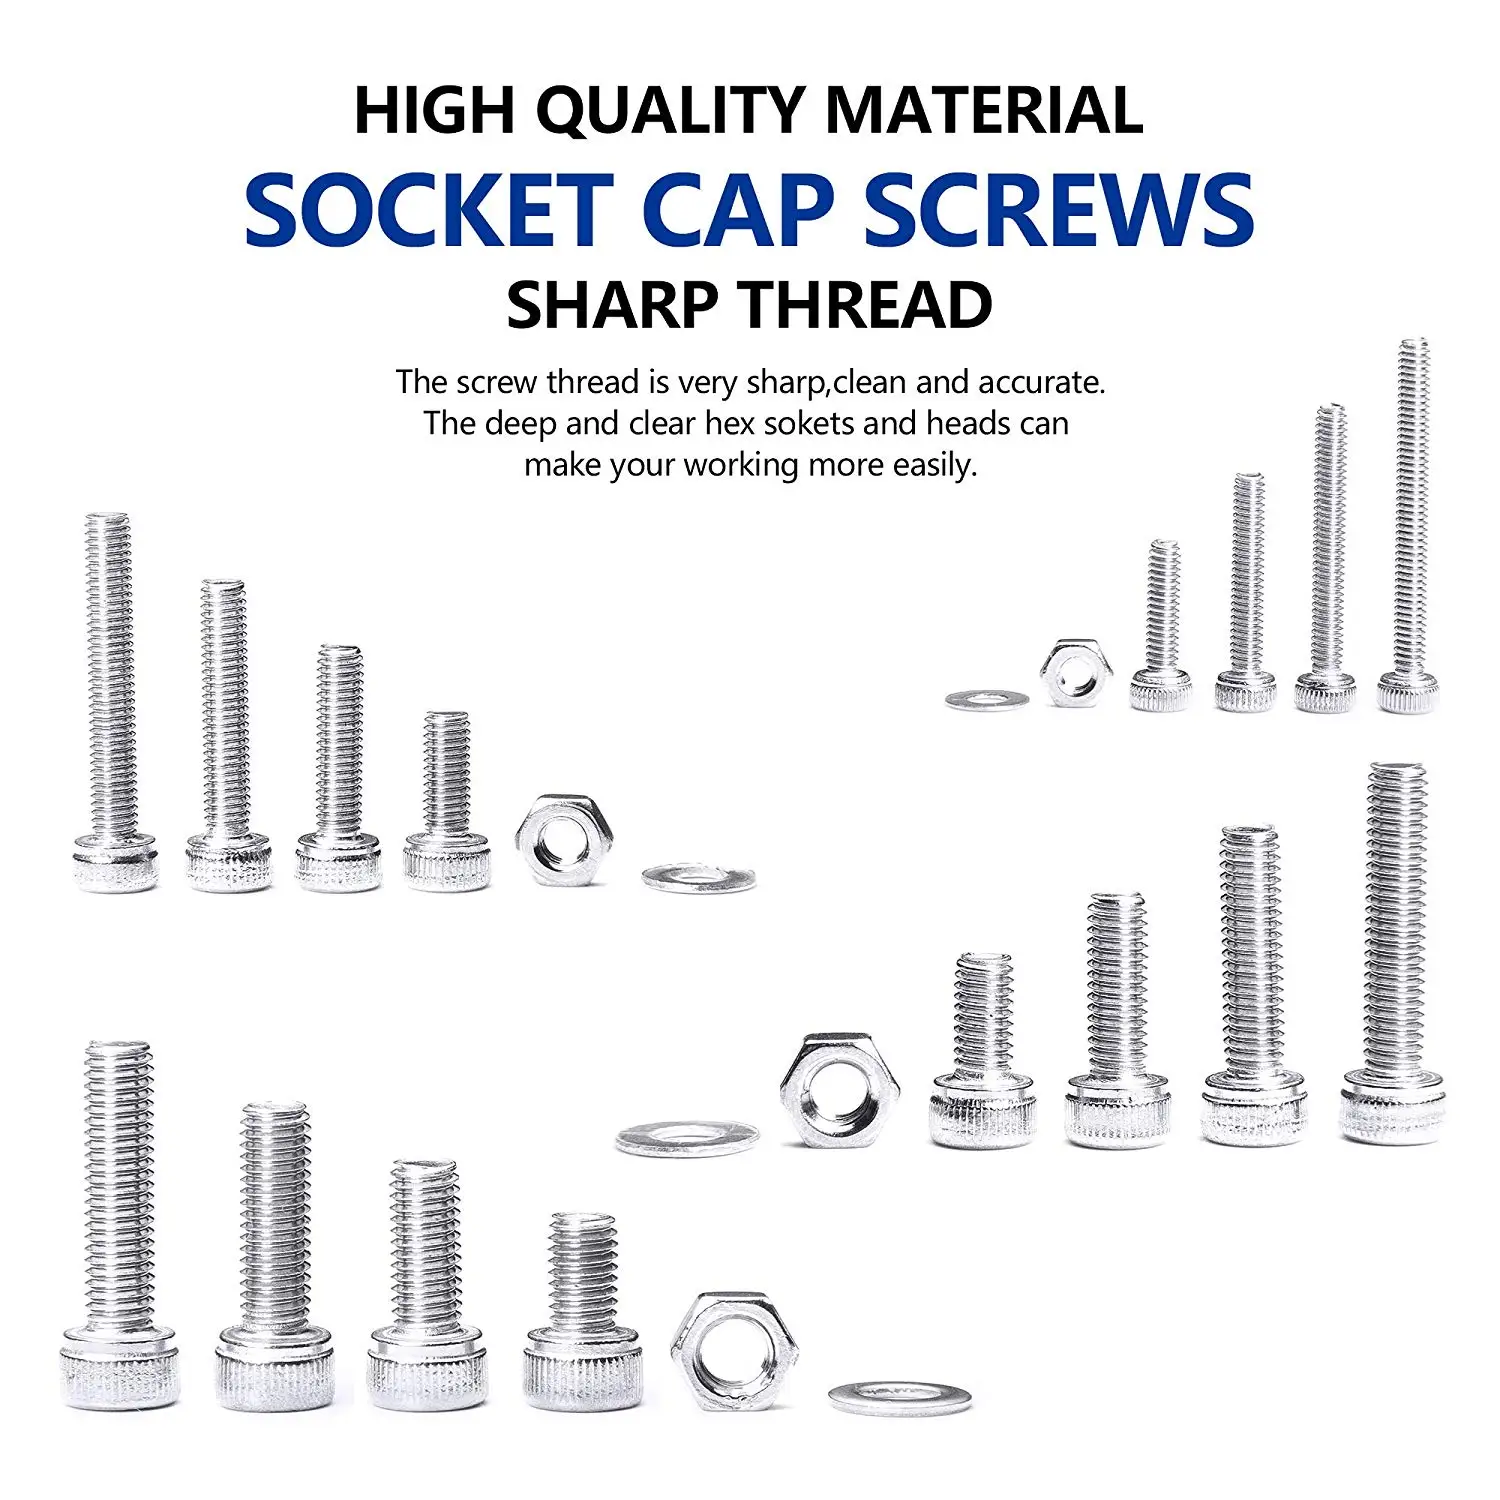 Stainless Steel 18-8 Fully Threaded Extra-large and Thick Flat & Lock Washers Nuts 10 Sets M6-1.00 x 16MM Hex Head Screws Bolts Plain Finish